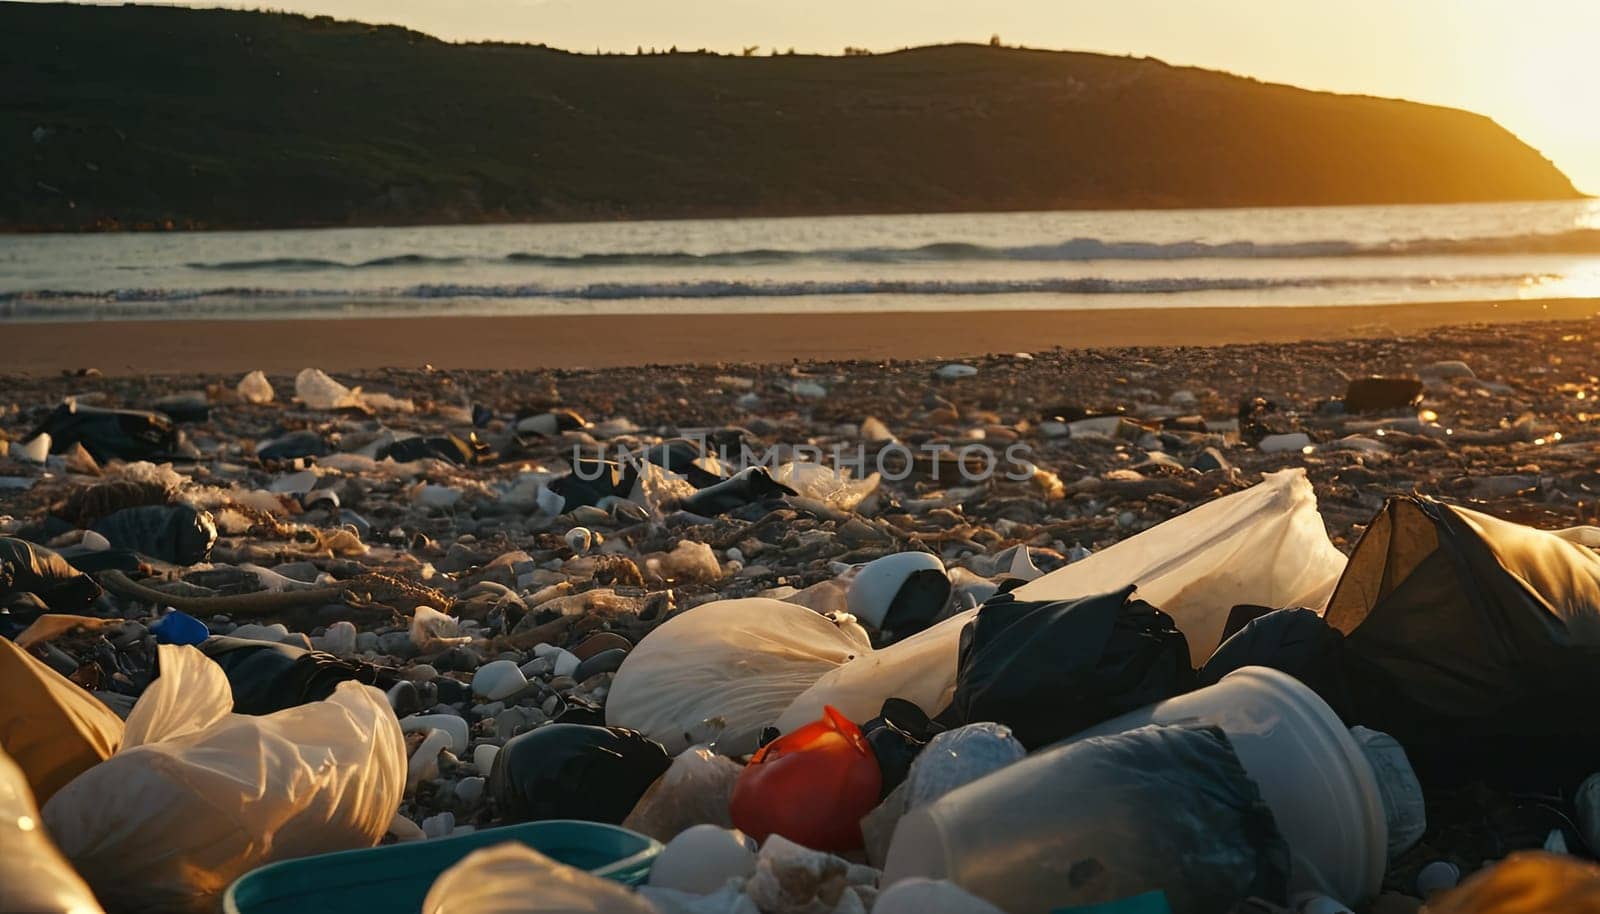 A beach covered in trash, including plastic cups and bottles. The sun is setting in the background, creating a moody atmosphere